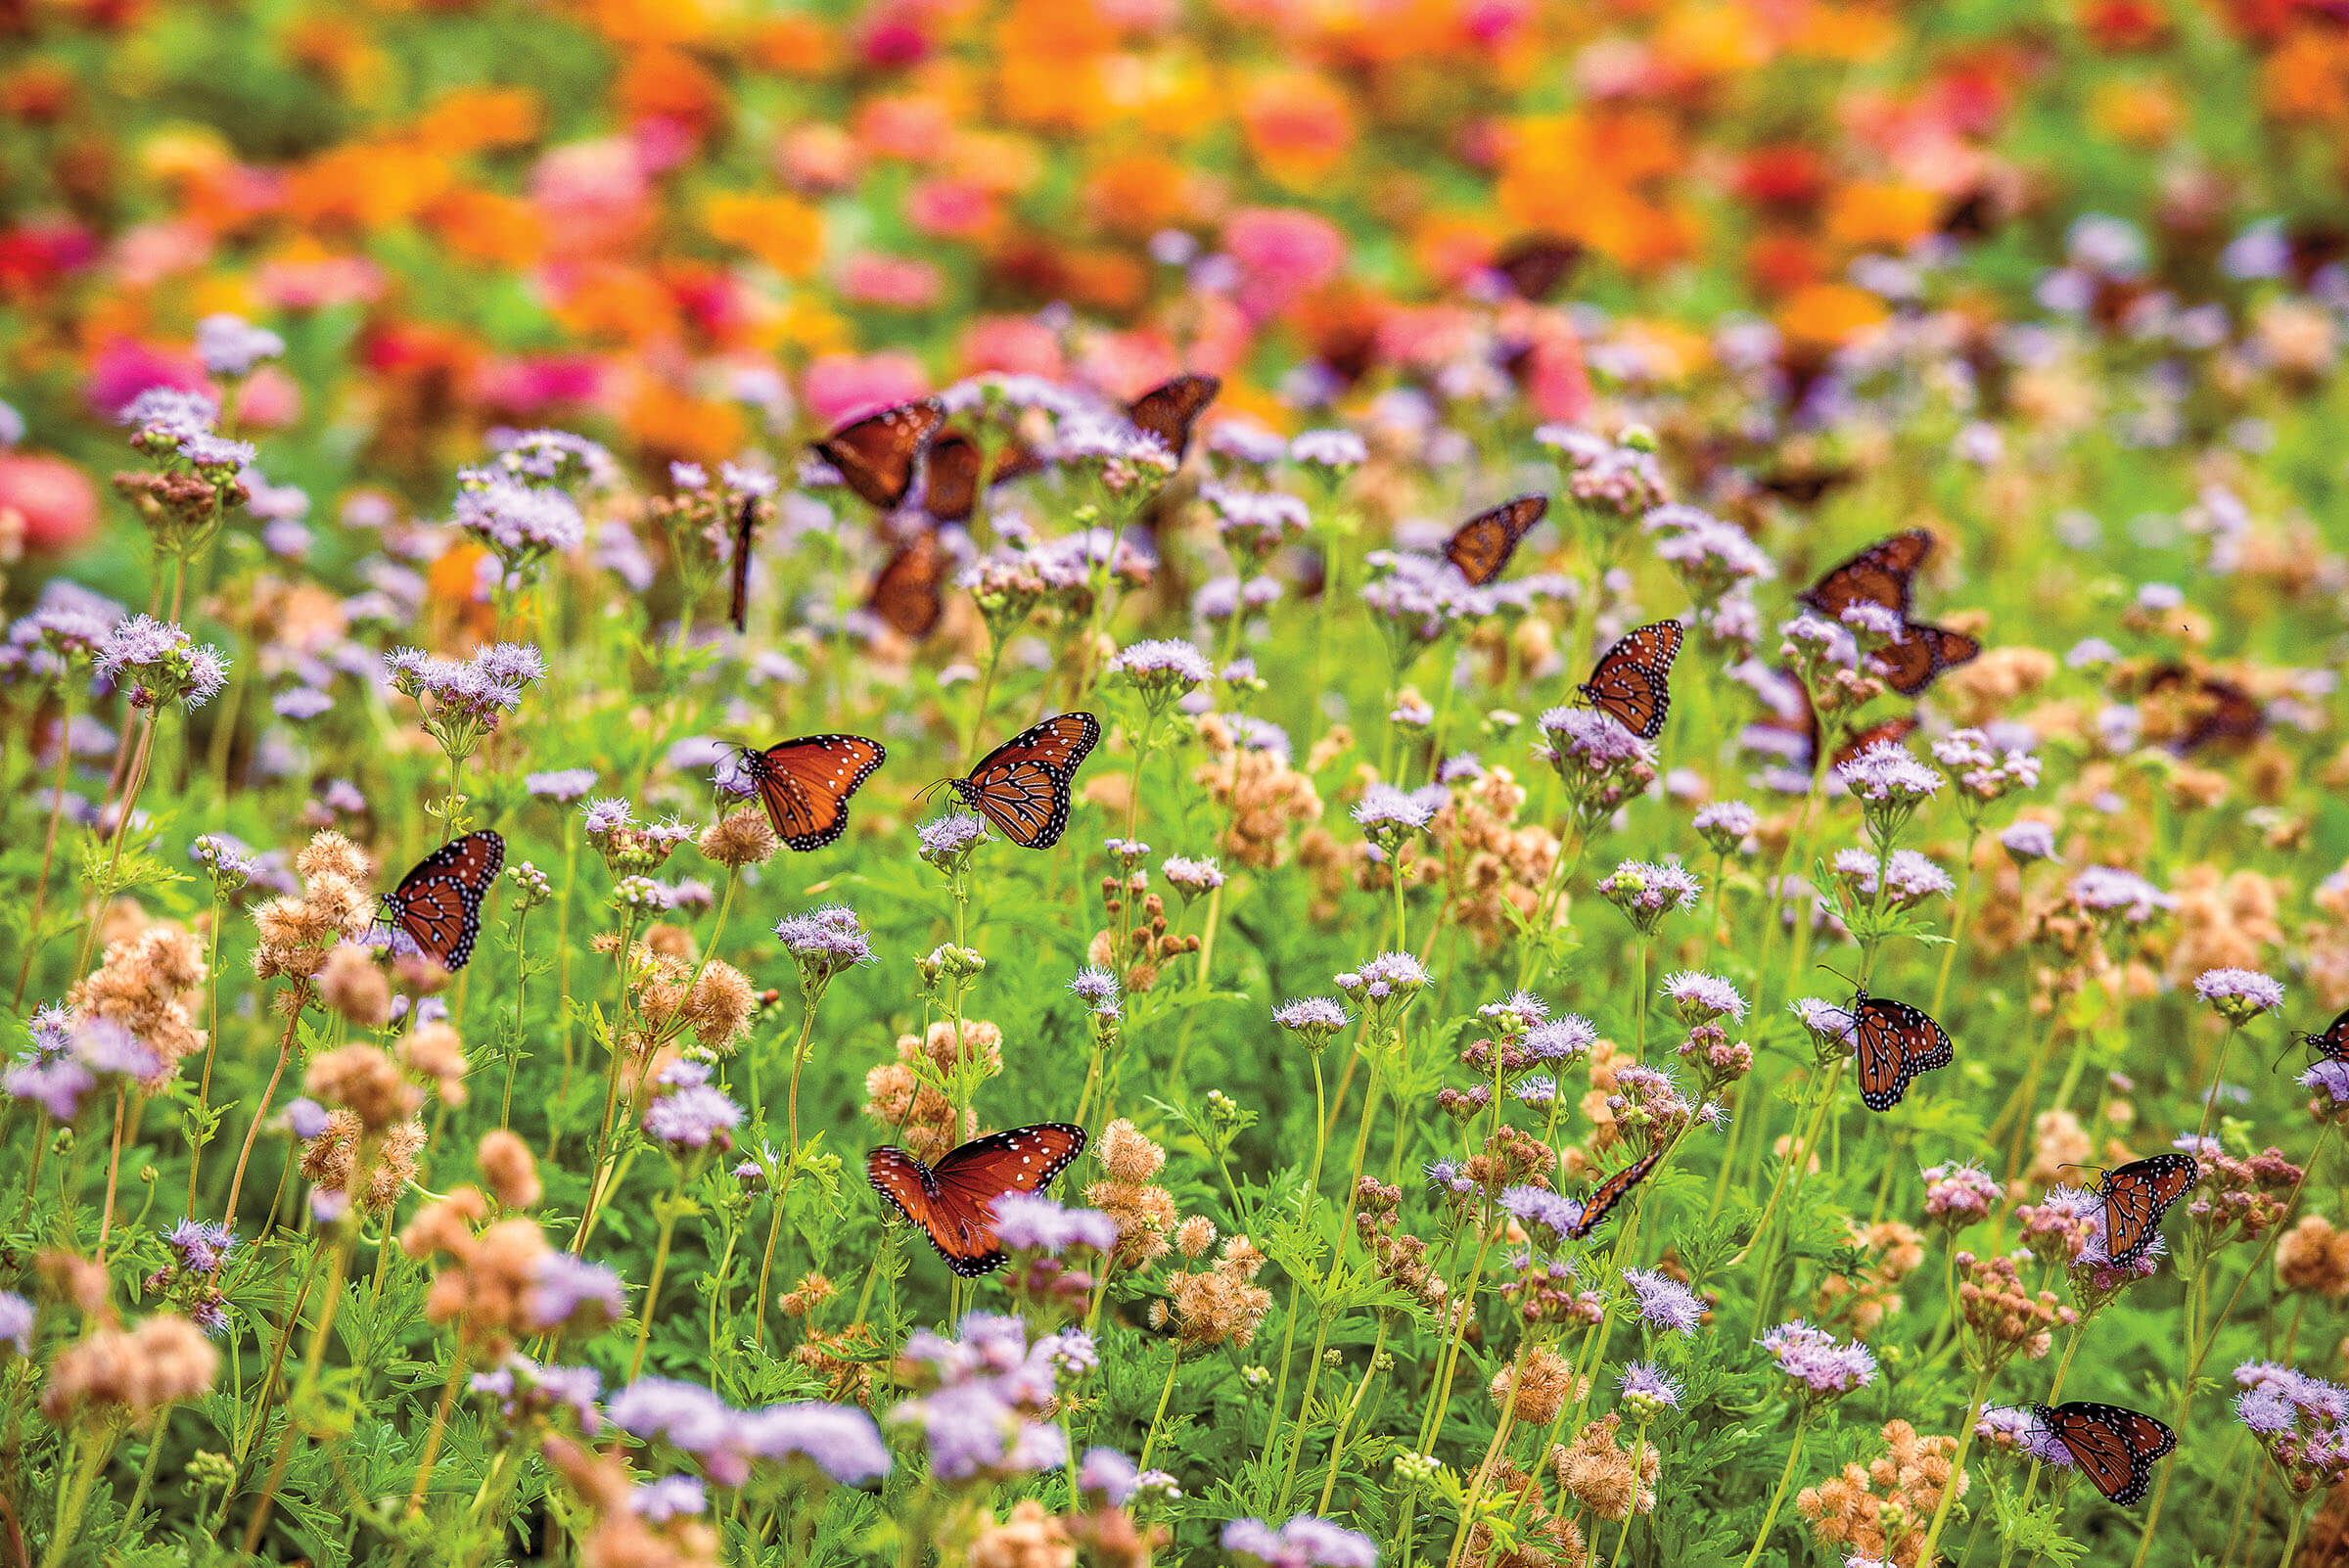 Numerous Monarch butterflies fly through bright green, yellow, and orange flowers